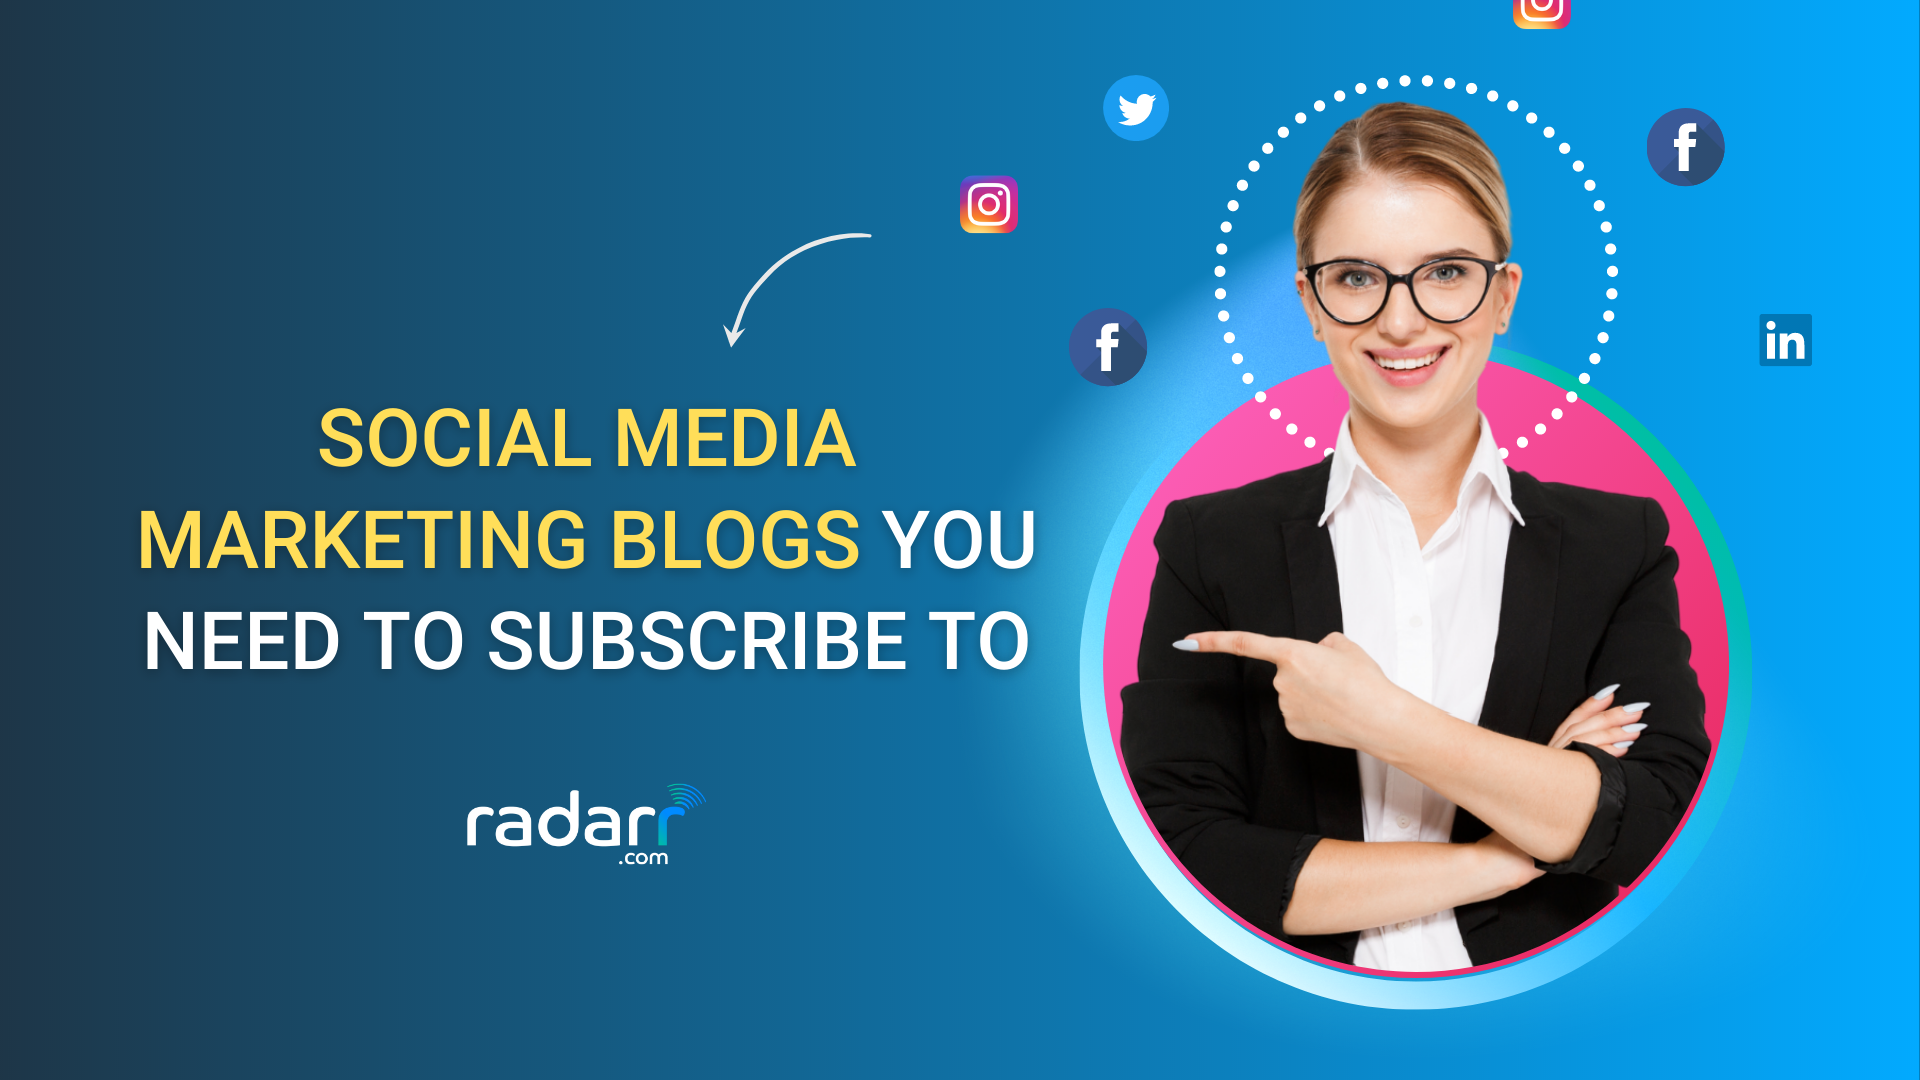 List of the Best Social Media Marketing Blogs We Recommend Subscribing to